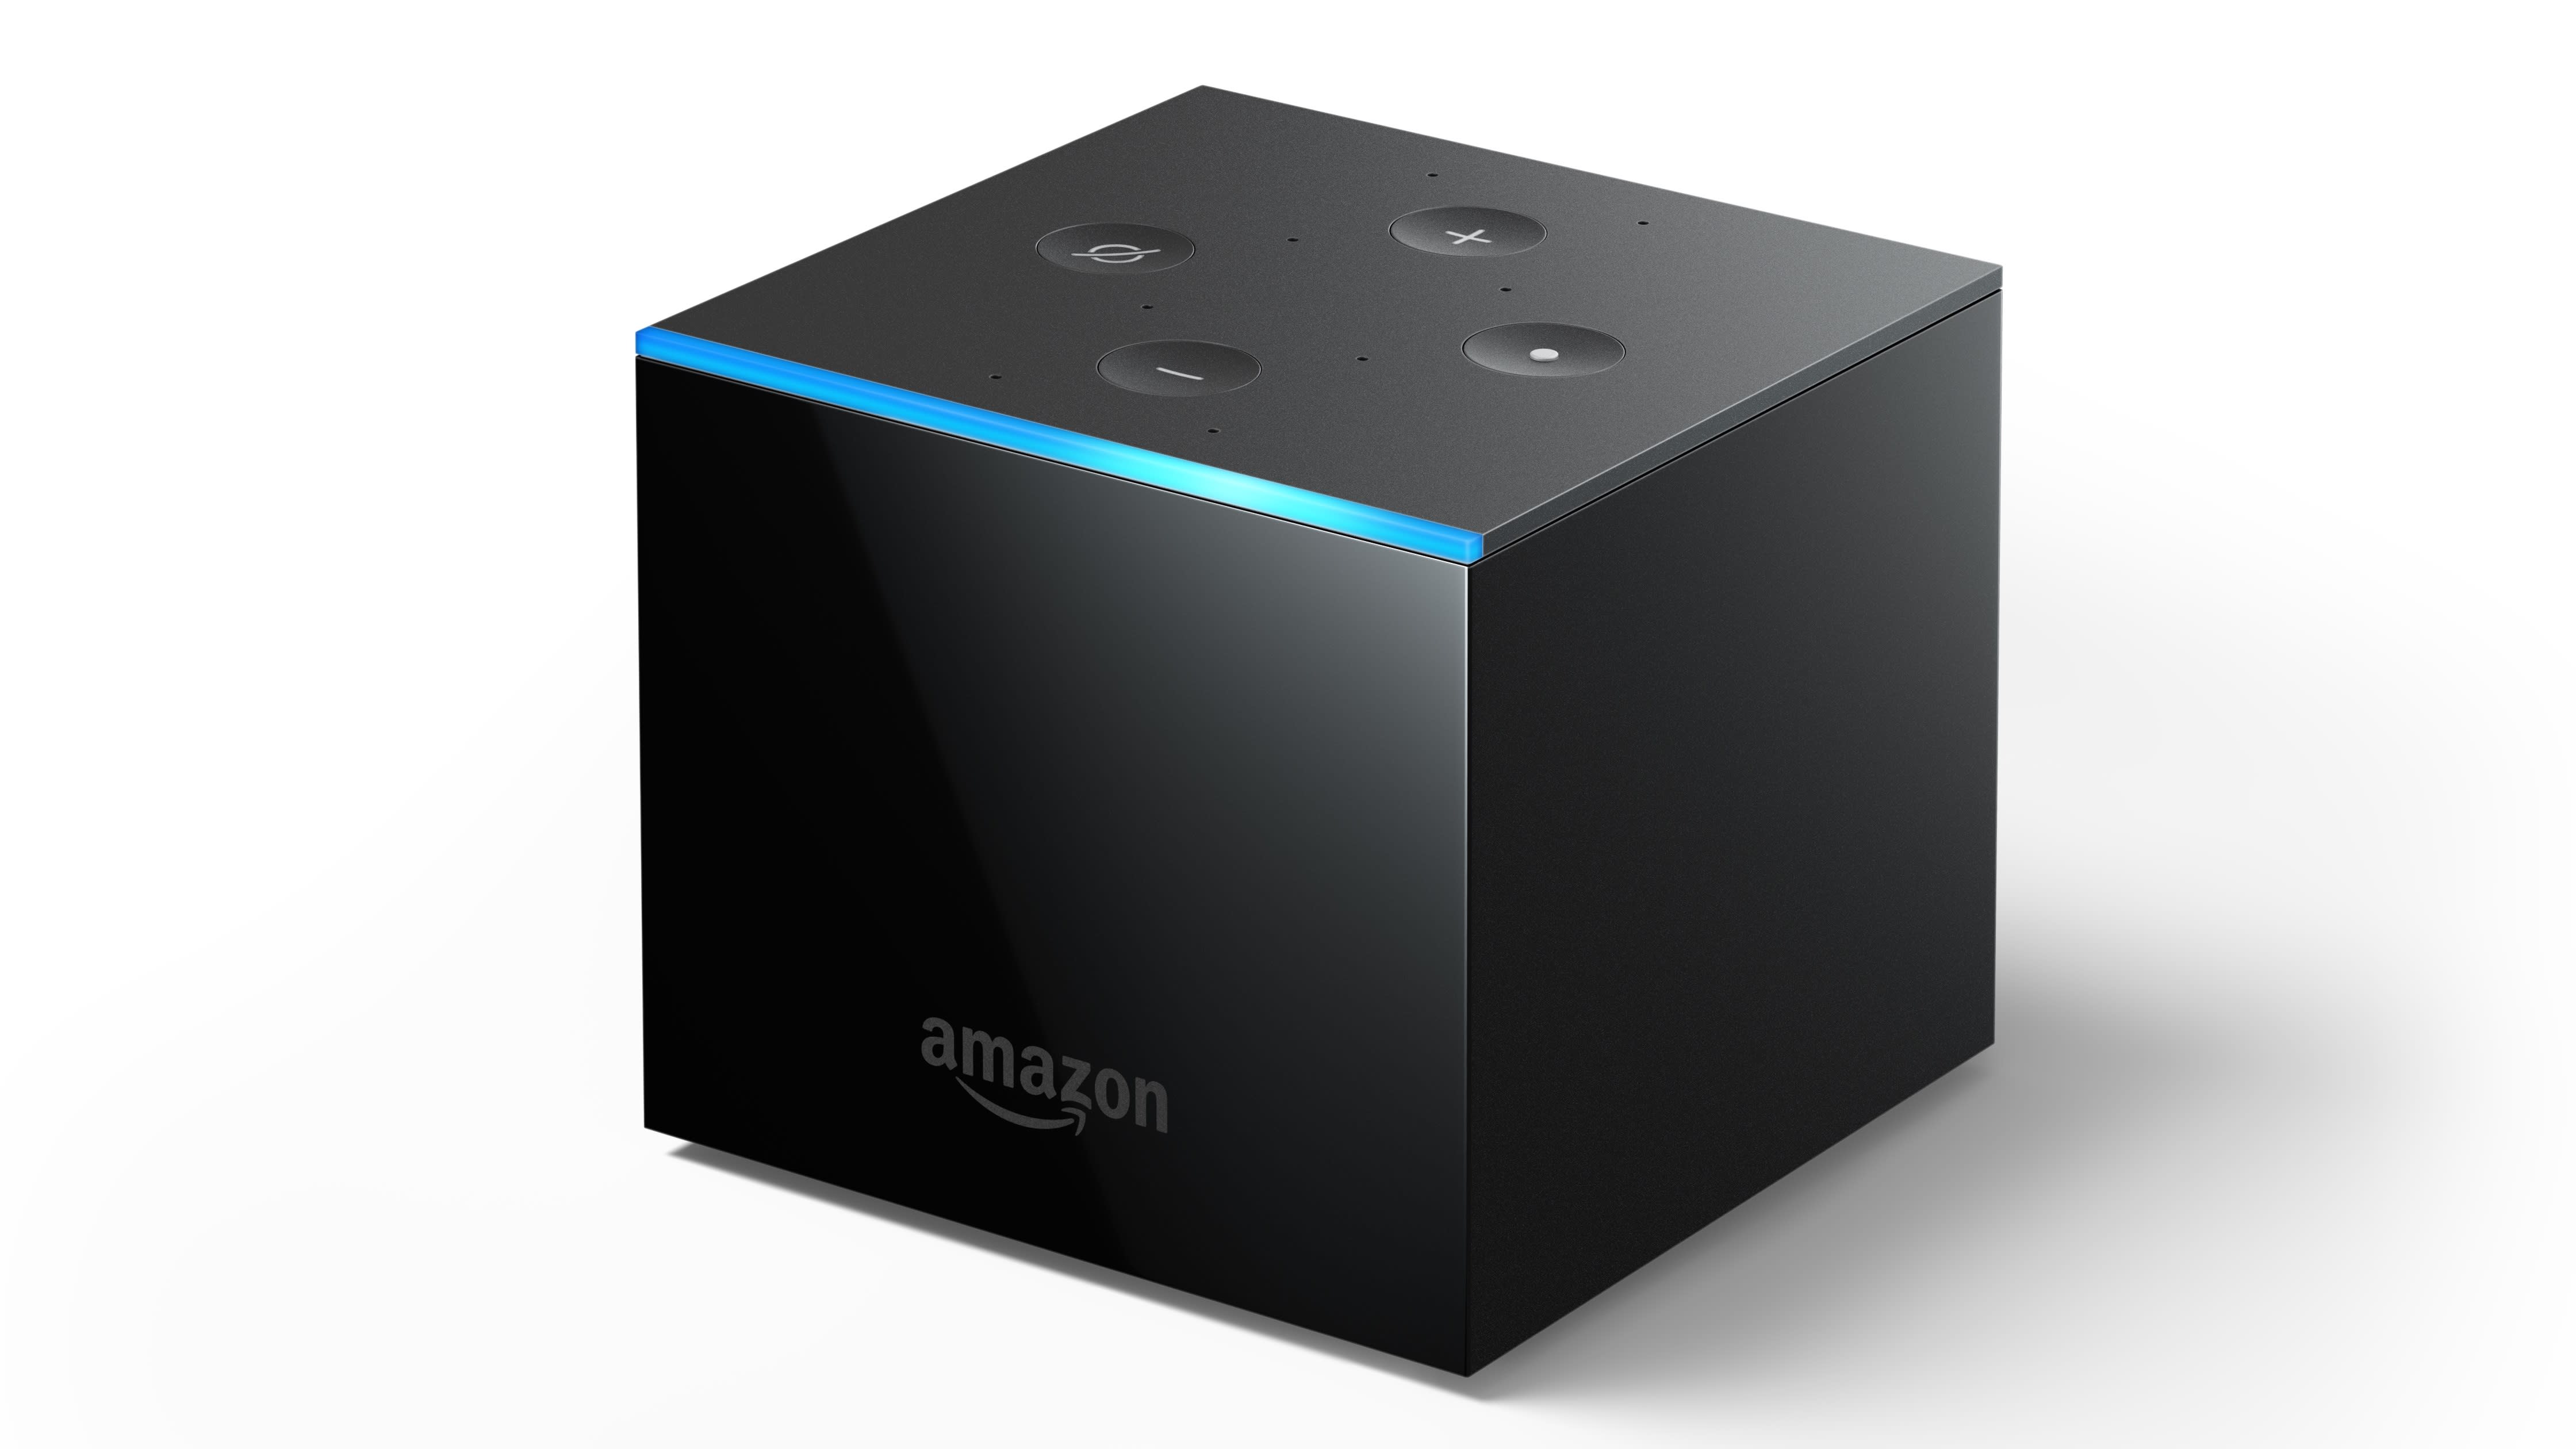 Amazon Unveils Fire TV Cube, Which Adds Hands-Free Alexa Voice Controls